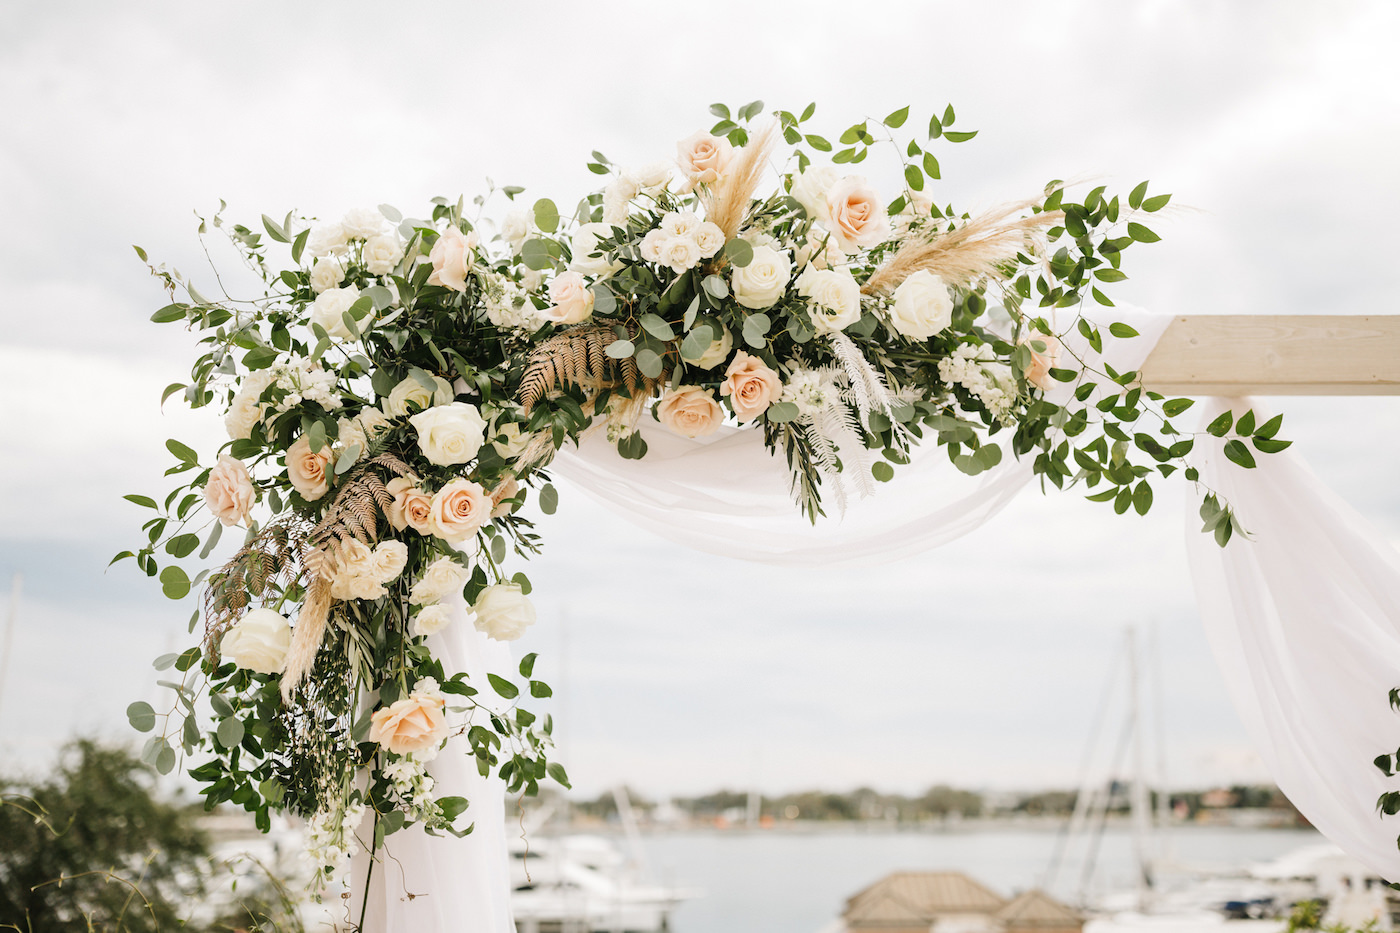 Boho Chic Outdoor Waterfront Ceremony, White Wooden Arch with White Linen Draping, Decorated with Lush Ivory Flowers and Blush Pink Roses, Pampas Grass Bouquets with Greenery | Wedding Venue The Esplanade Location of the Vinoy Renaissance Resort in Downtown St. Petersburg | Tampa Bay Luxury Wedding Planner Parties A’ La Carte